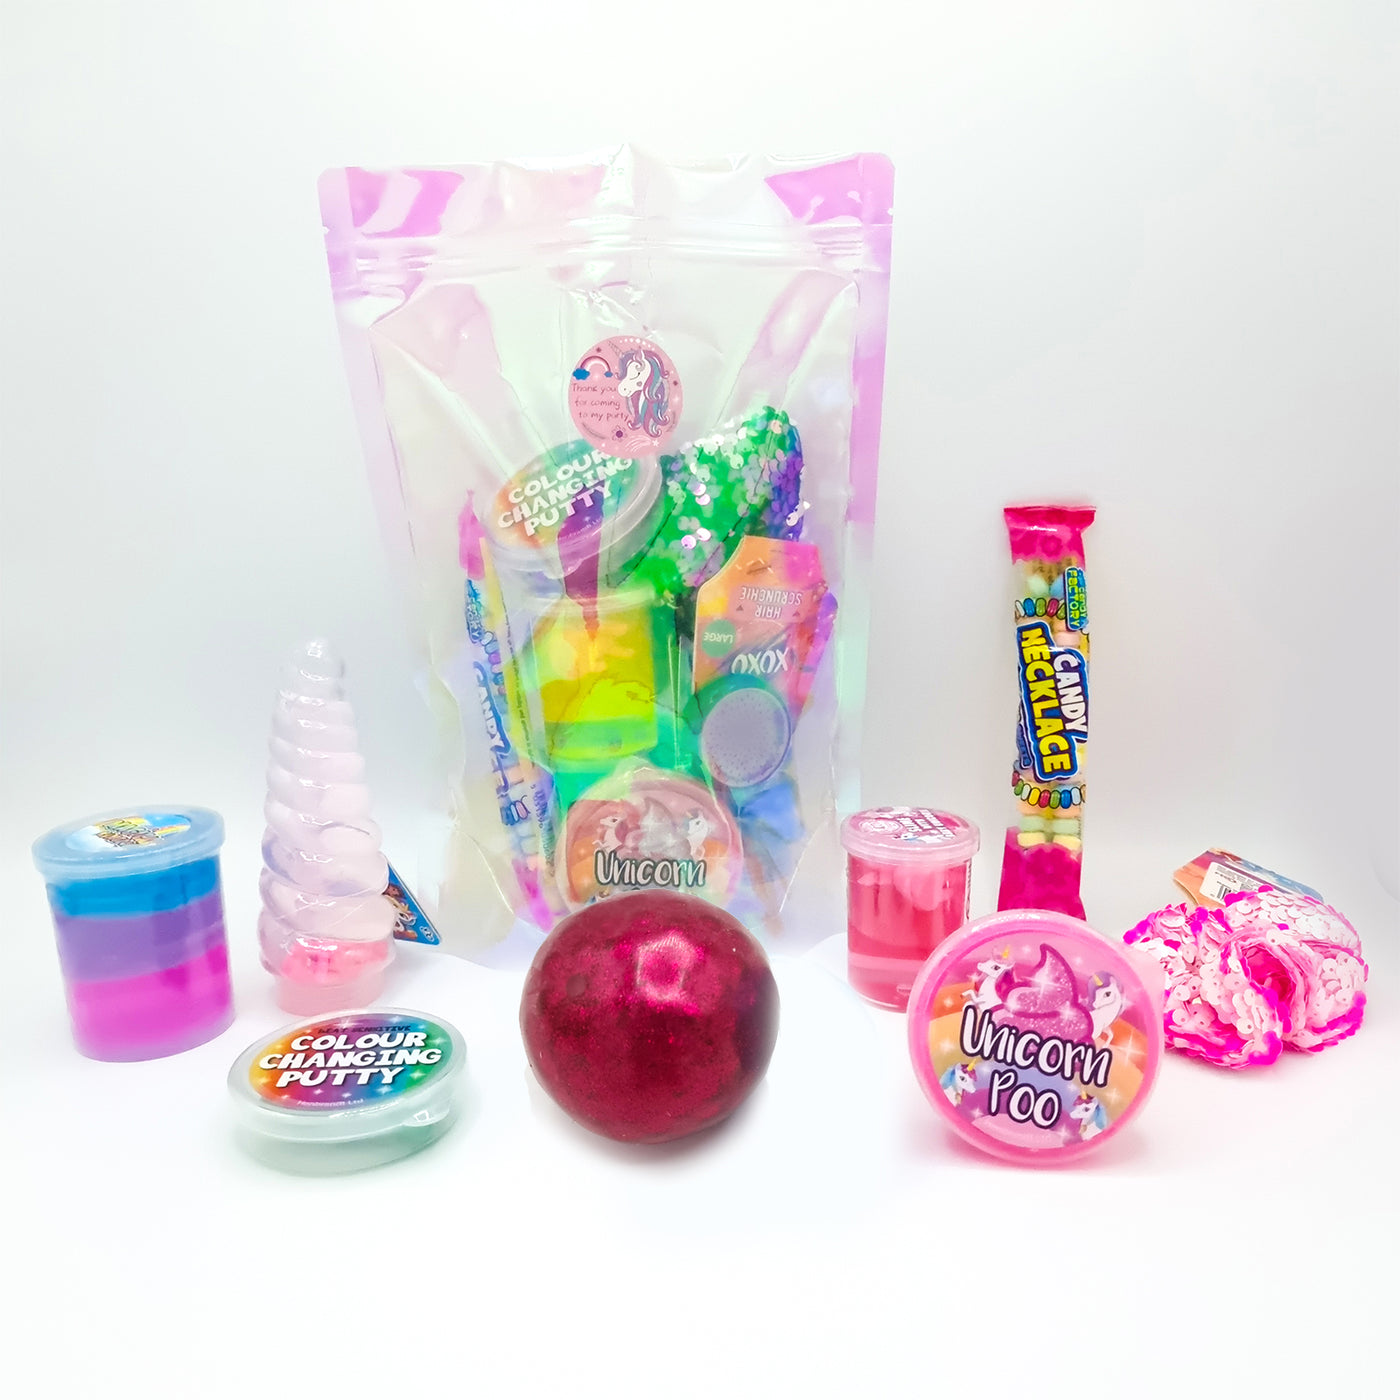 Pre Filled Slime Party Bags For Girls, Party Favours Unicorn Slime Gift Bag Pre Packed In Iridescent Pink Gift Bags